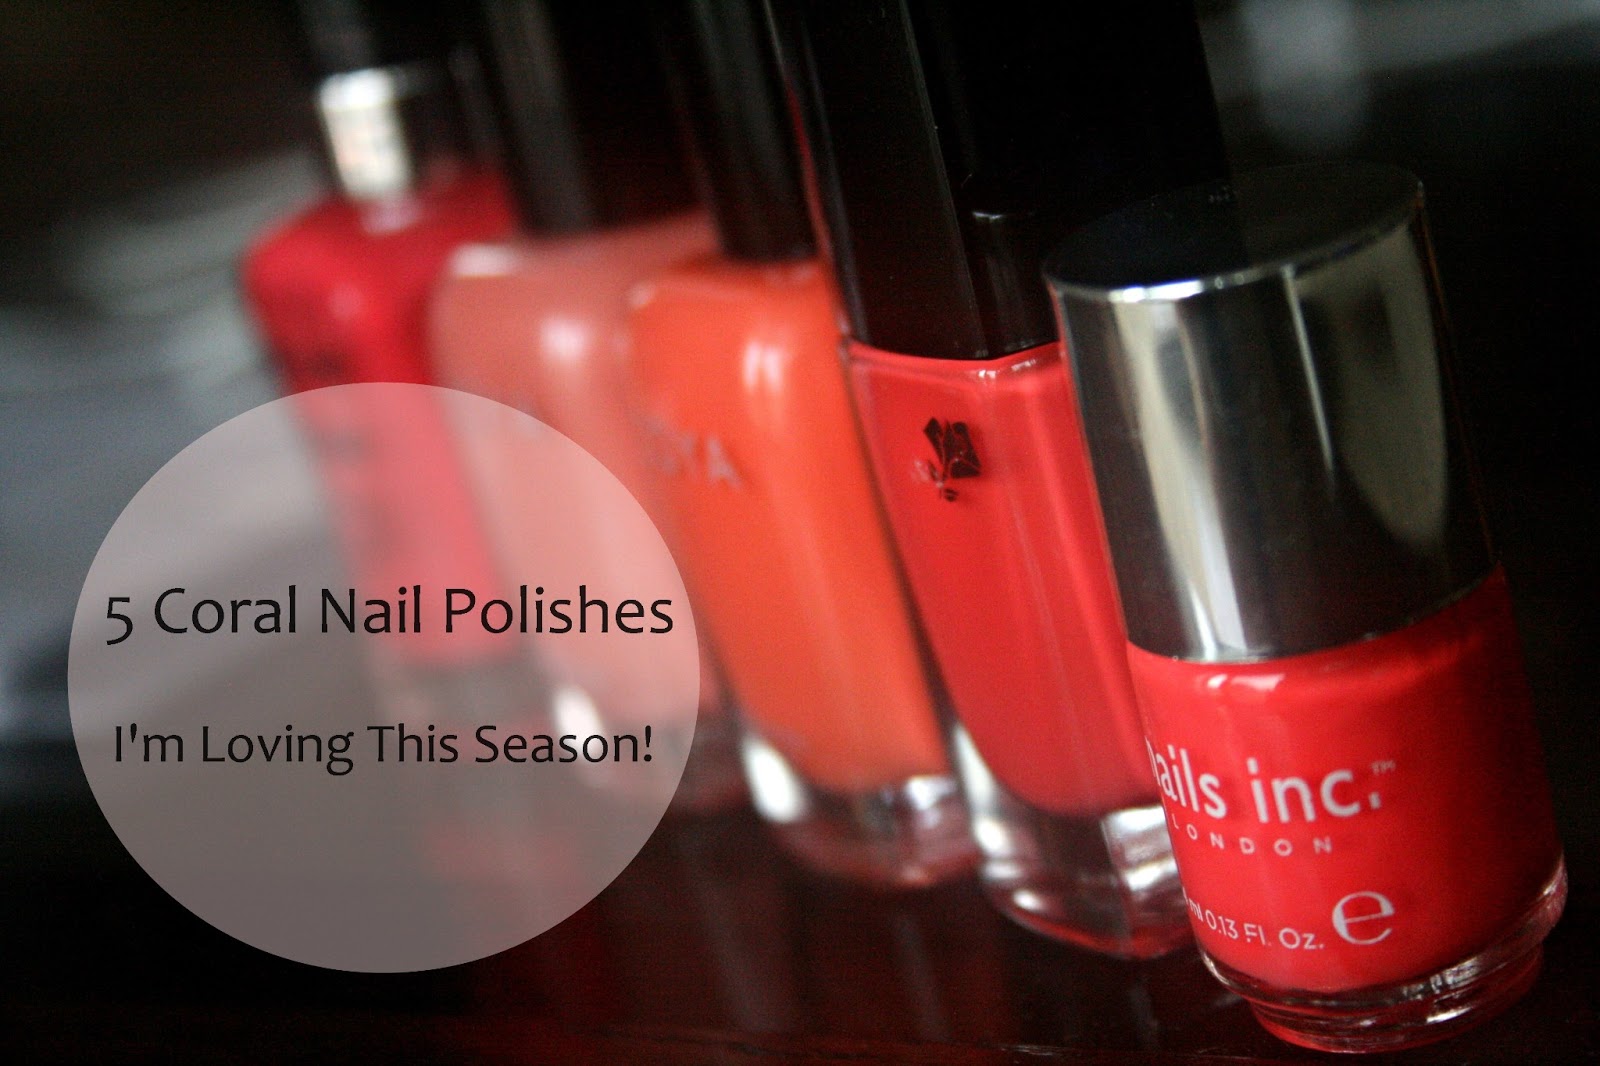 5. "Coral Gel Nail Polish for Spring" - wide 1